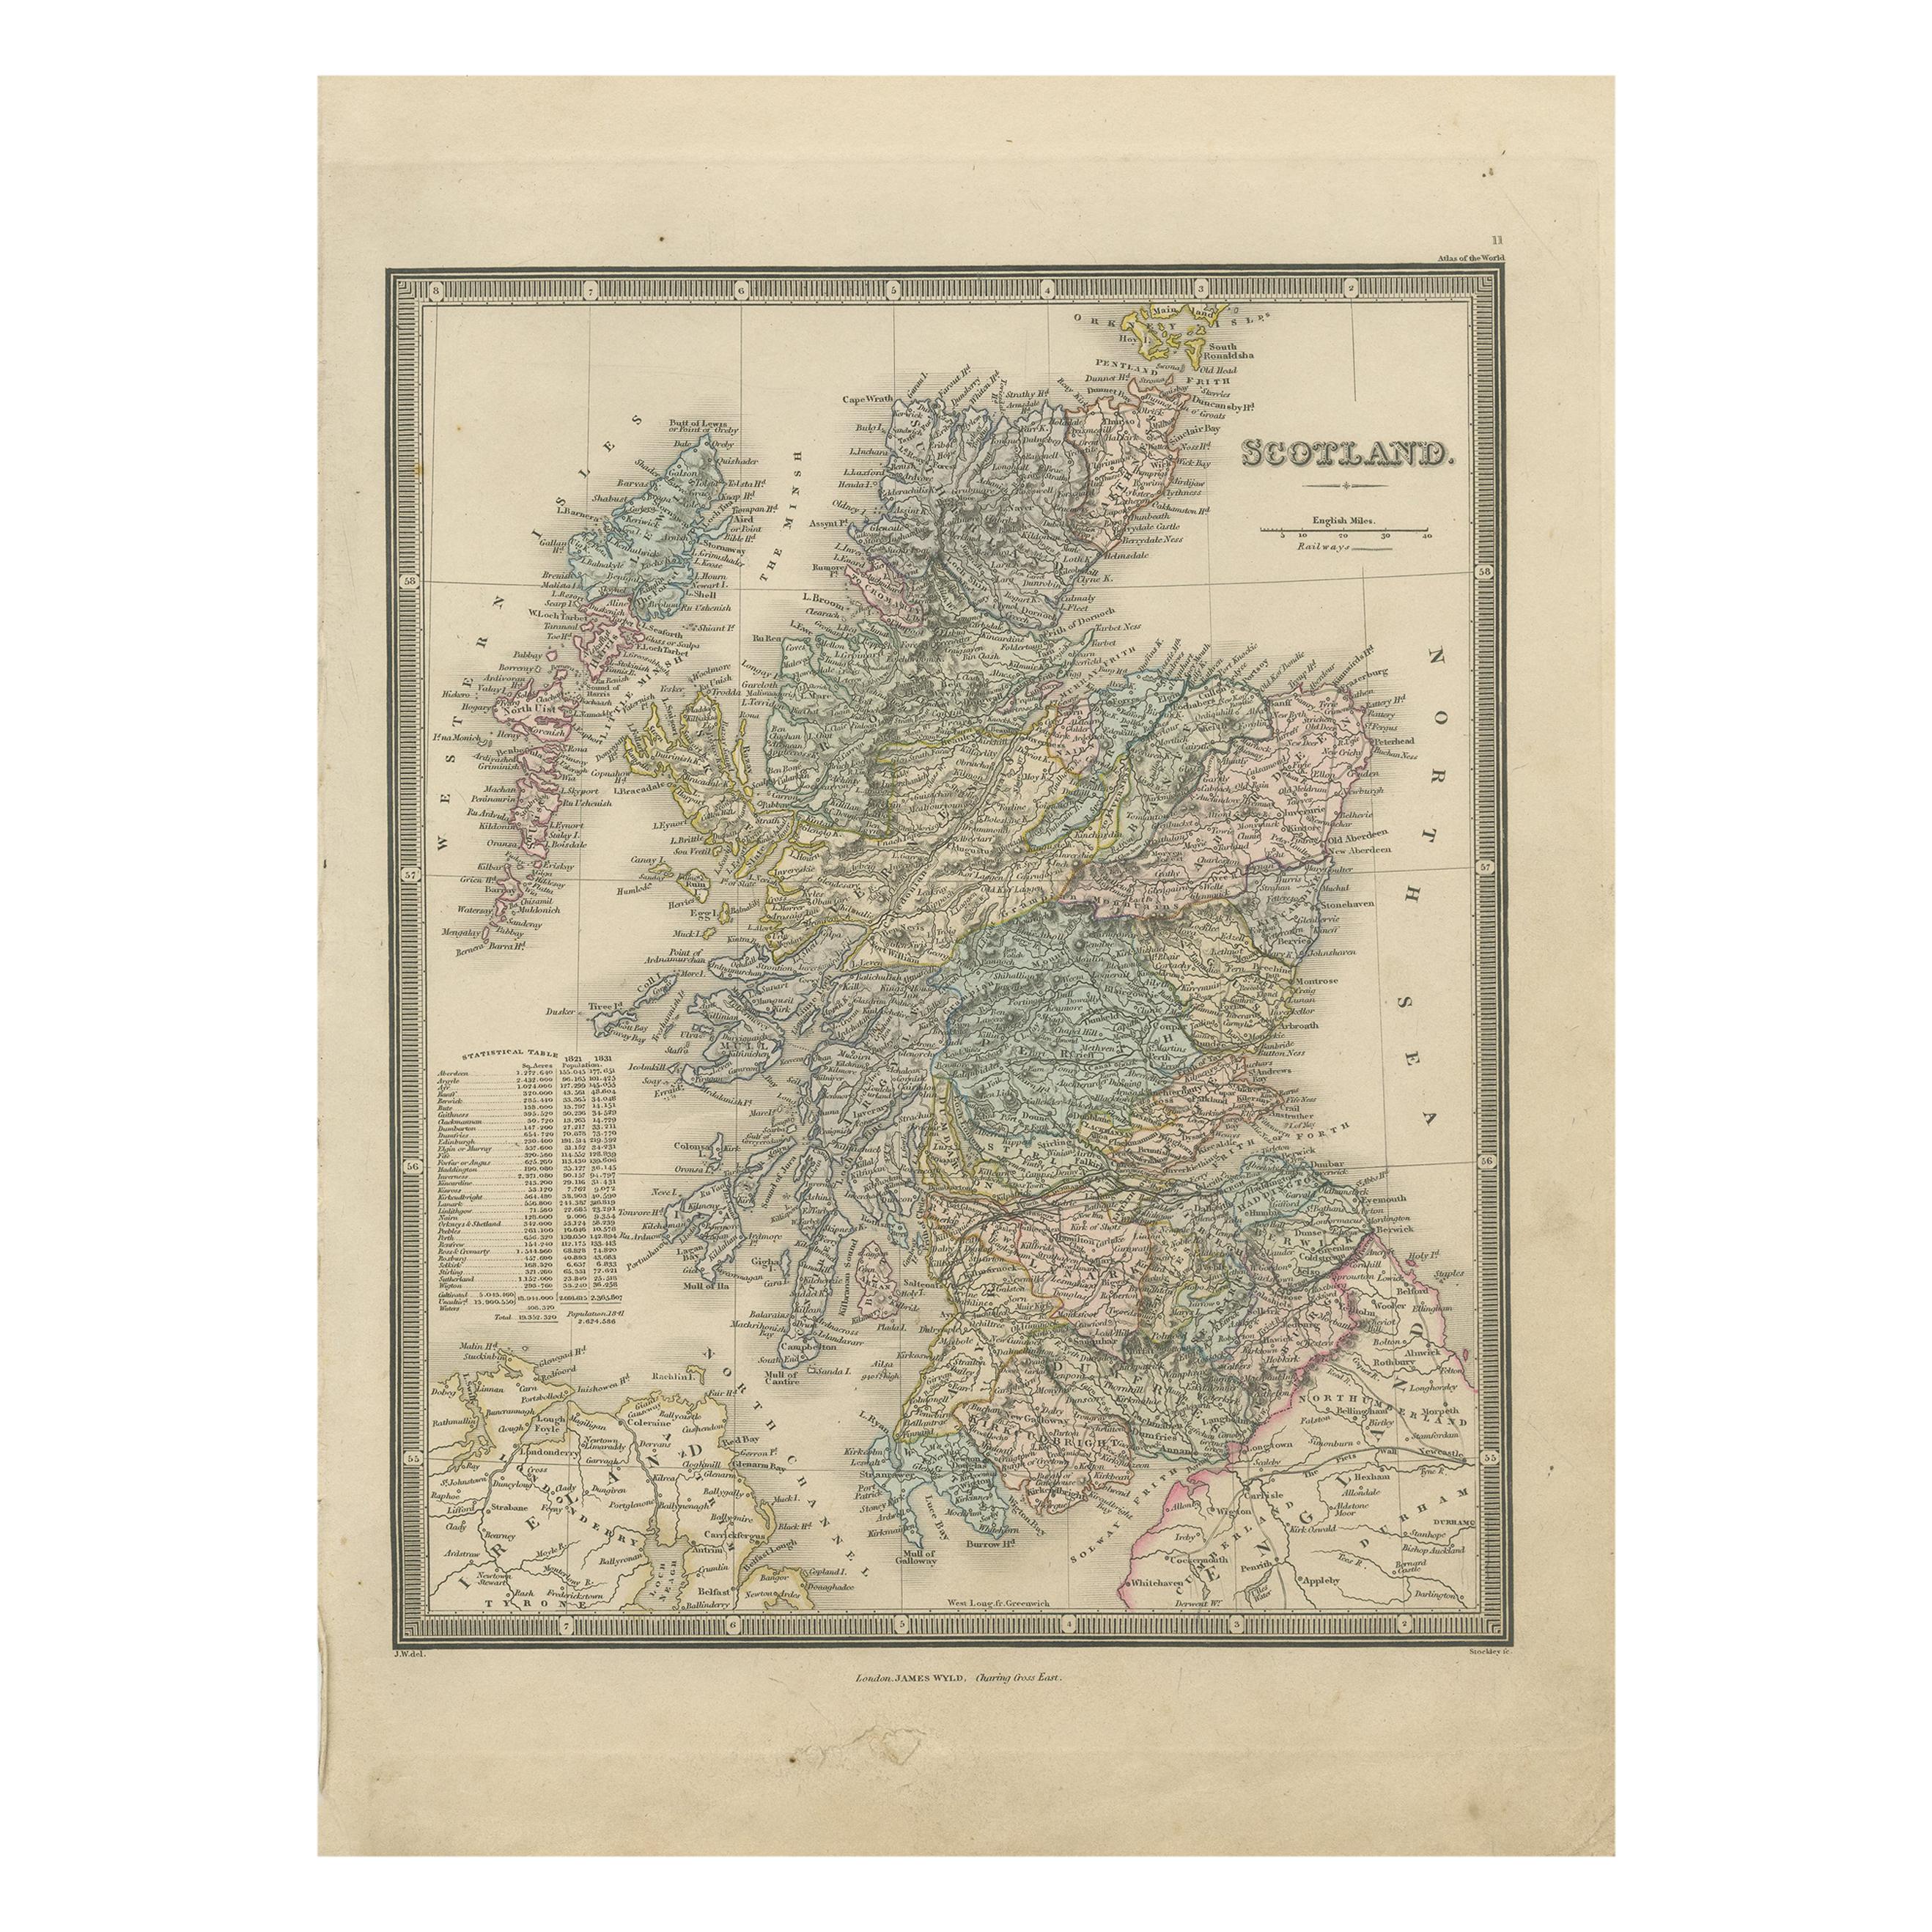 Antique Map of Scotland by Wyld, '1845'